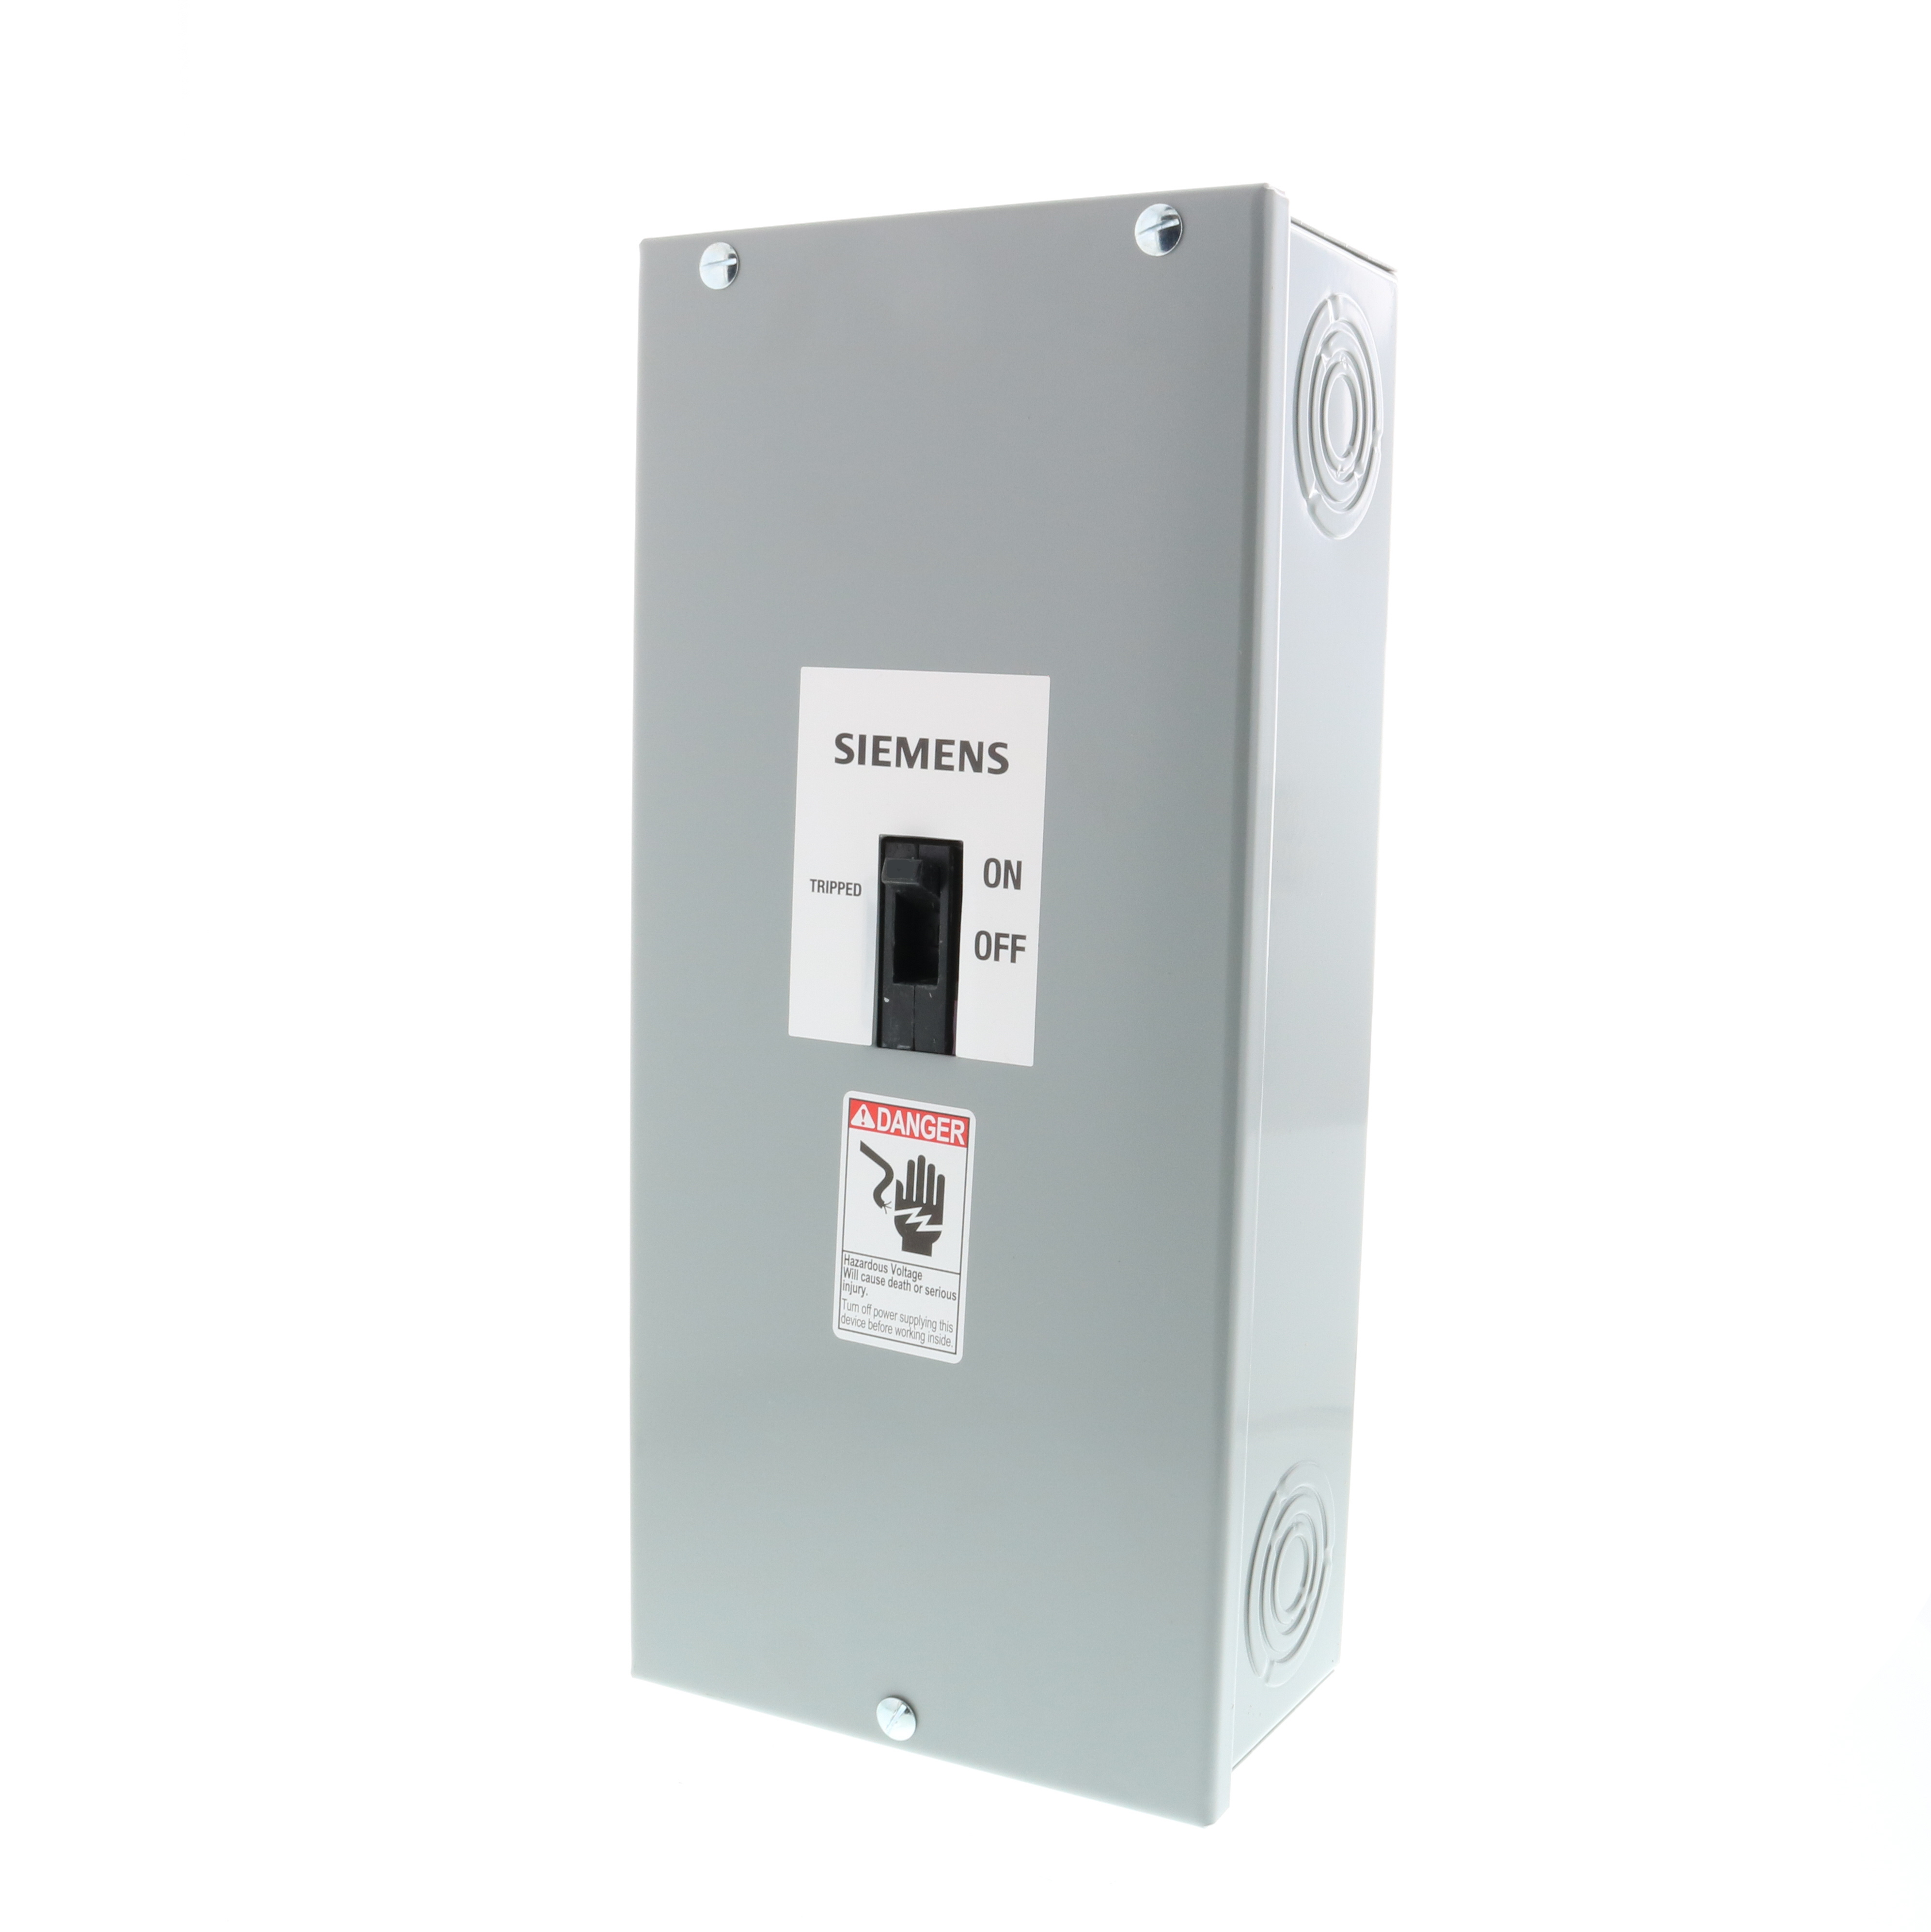 SIEMENS LOW VOLTAGE ENCLOSED SENTRON MOLDED CASE CIRCUIT BREAKER (ASSEMBLED) WITH THERMAL - MAGNETIC TRIP UNIT. 15A 2-POLE 240V STANDARD 40 DEG C BREAKER ED FRAME WITH STANDARD BREAKING CAPACITY (ED22B015). NON-INTERCHANGEABLE TRIP UNIT. NEMA TYPE 1 ENCLOSURE SURFACE MOUNTED (E2N1S) WITH NEUTRAL (W53045). INCLUDES LINE AND LOAD SIDE LUGS (SA1E025) WIRE RANGE 14 - 10AWG (CU) / 12 - 10AWG (AL). ENCLOSURE DIMENSIONS (W x H x D) IN 7.50 x 16.72 x 5.06.